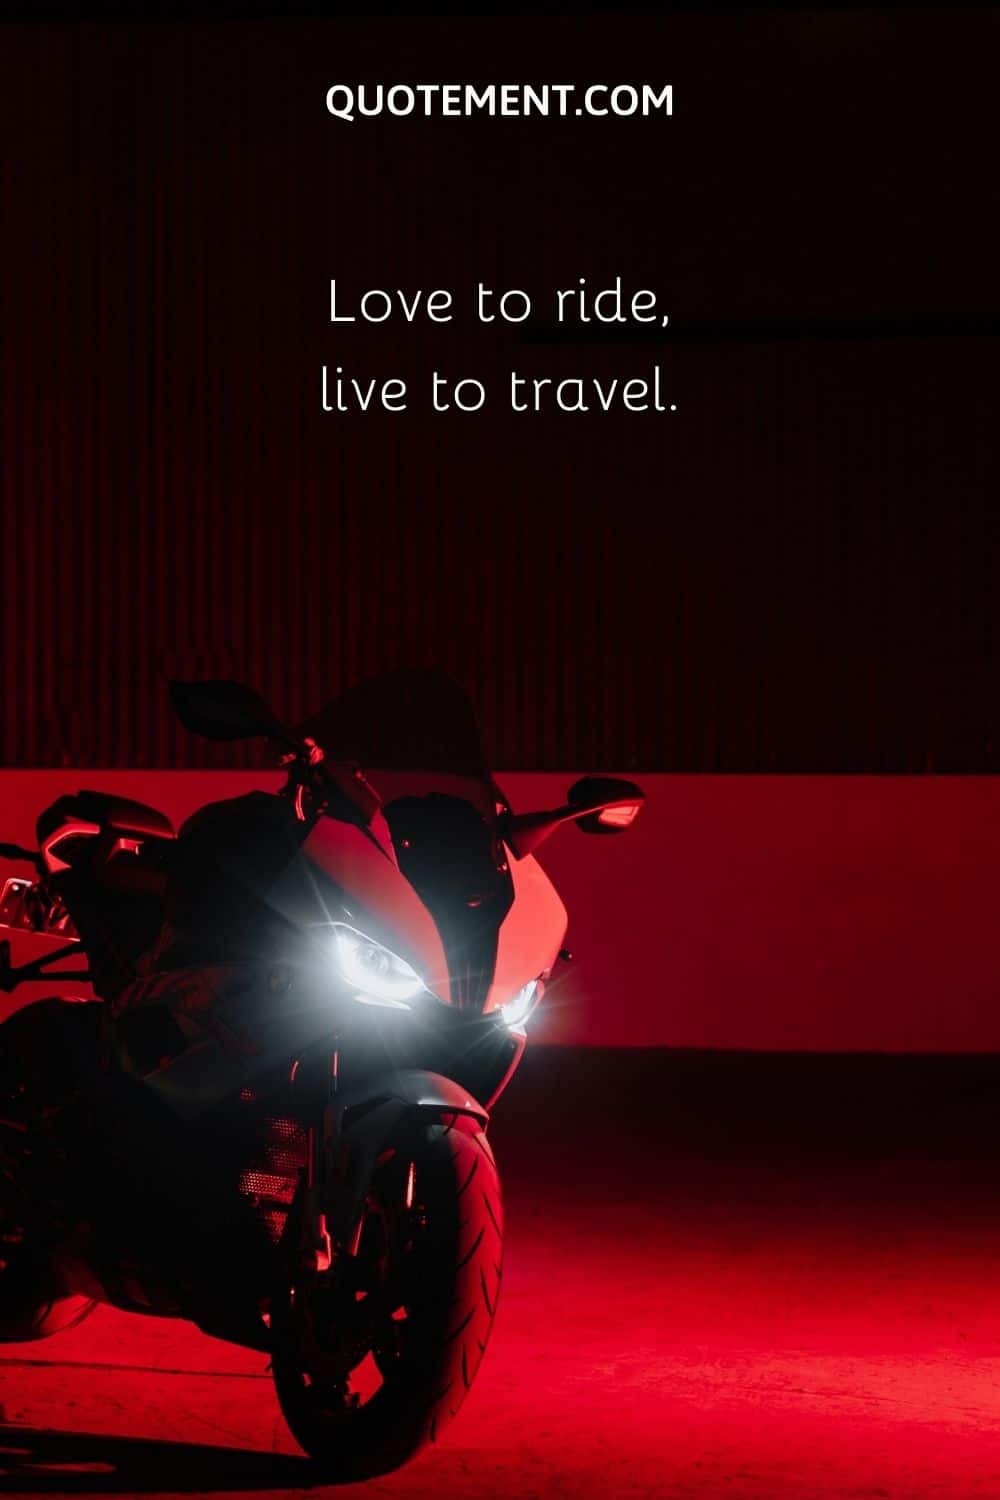 Love to ride, live to travel.